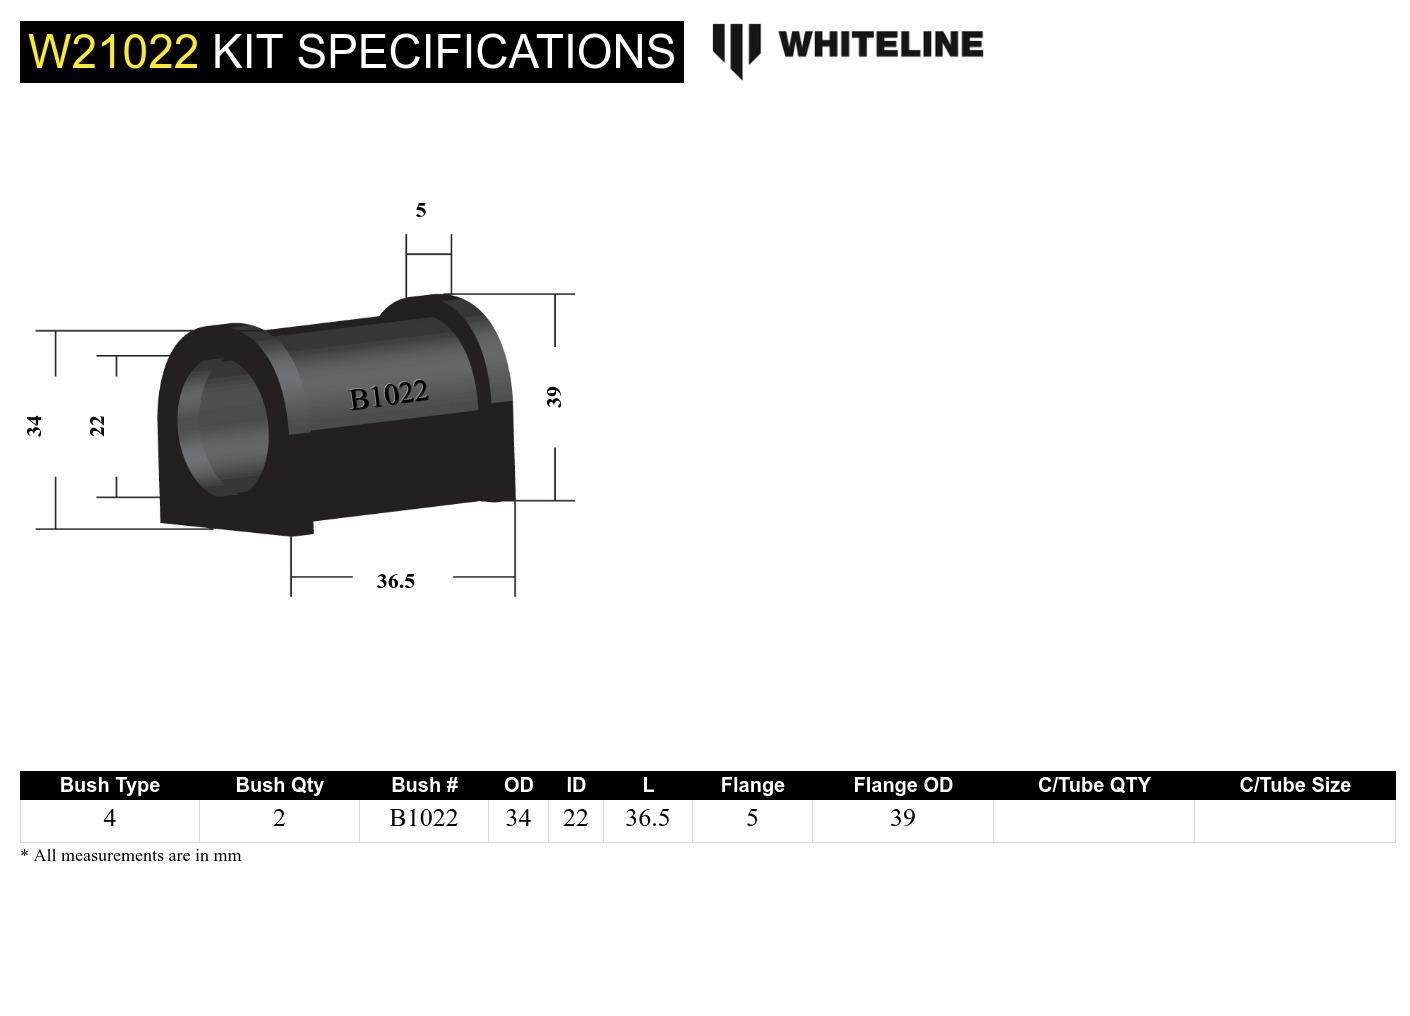 Kit Specifications Image